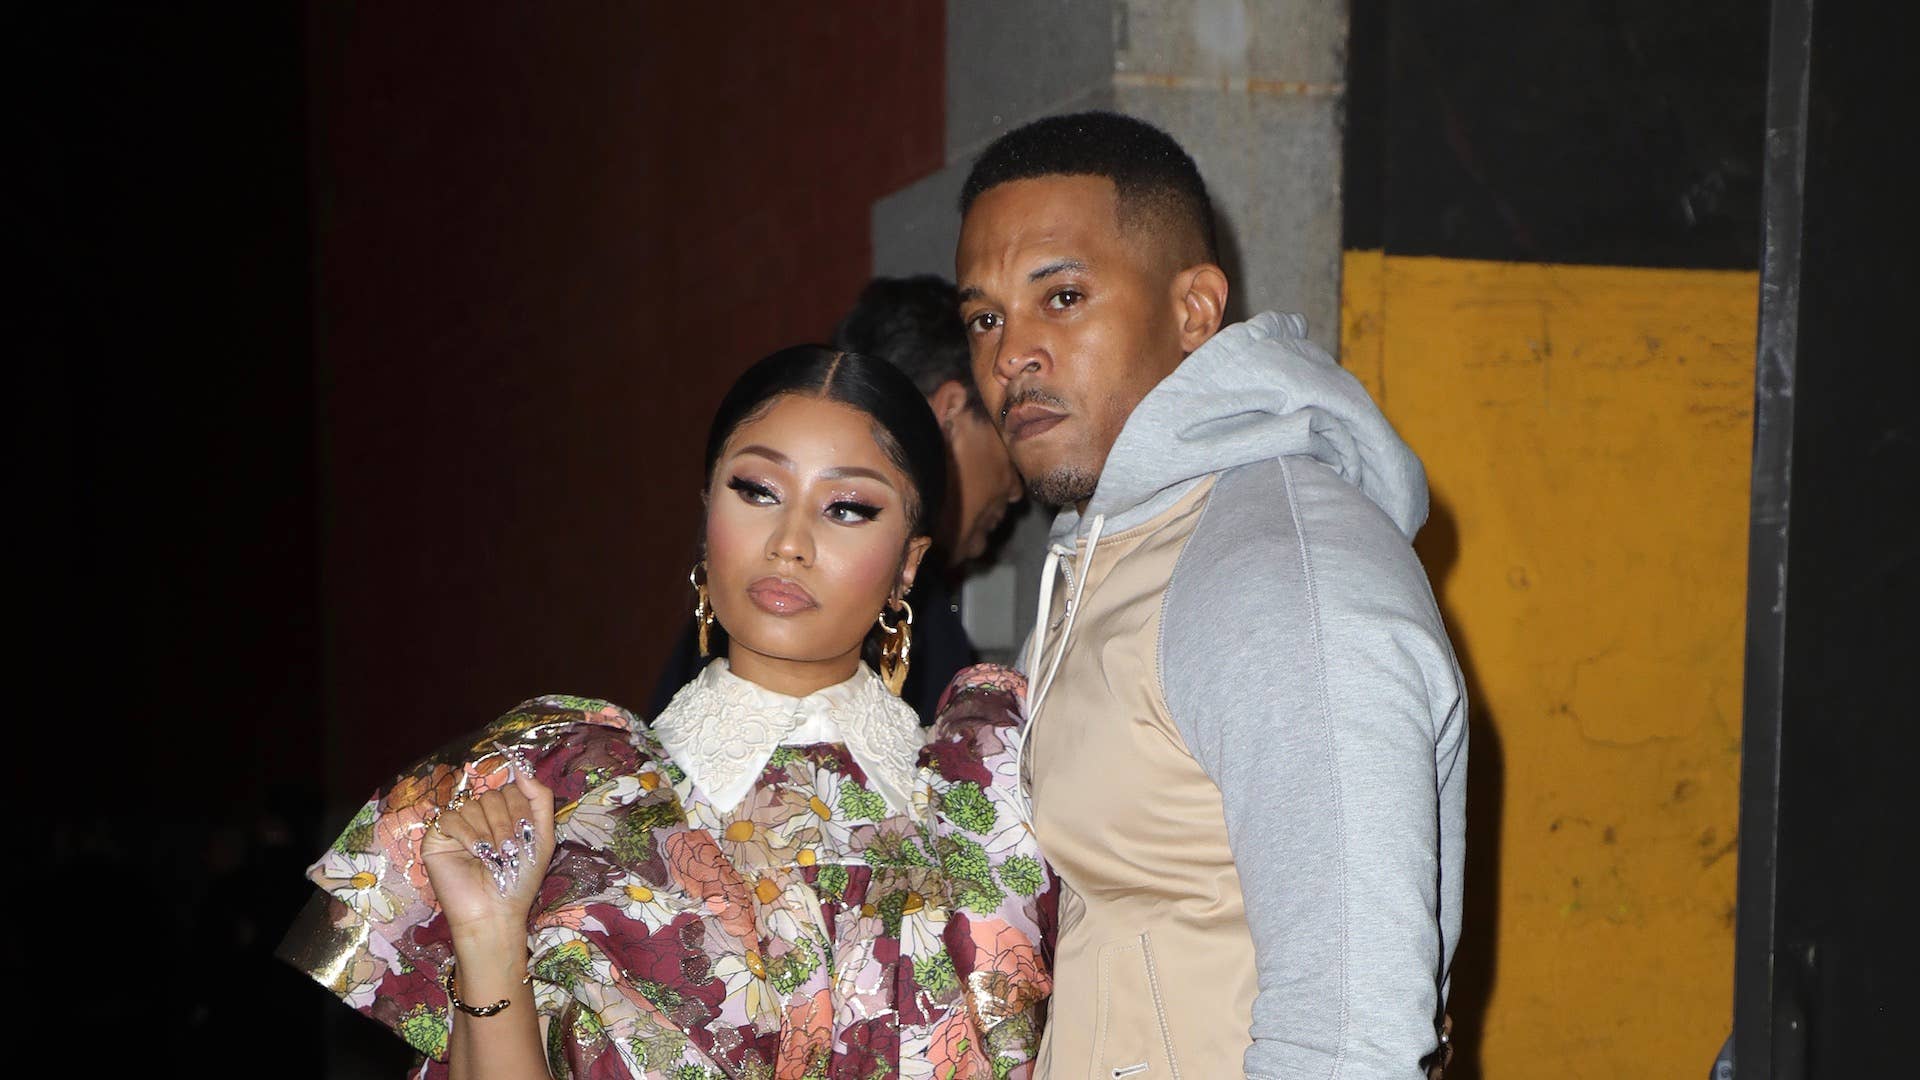 Nicki Minaj and Kenneth Petty are seen arriving at the Marc Jacobs show